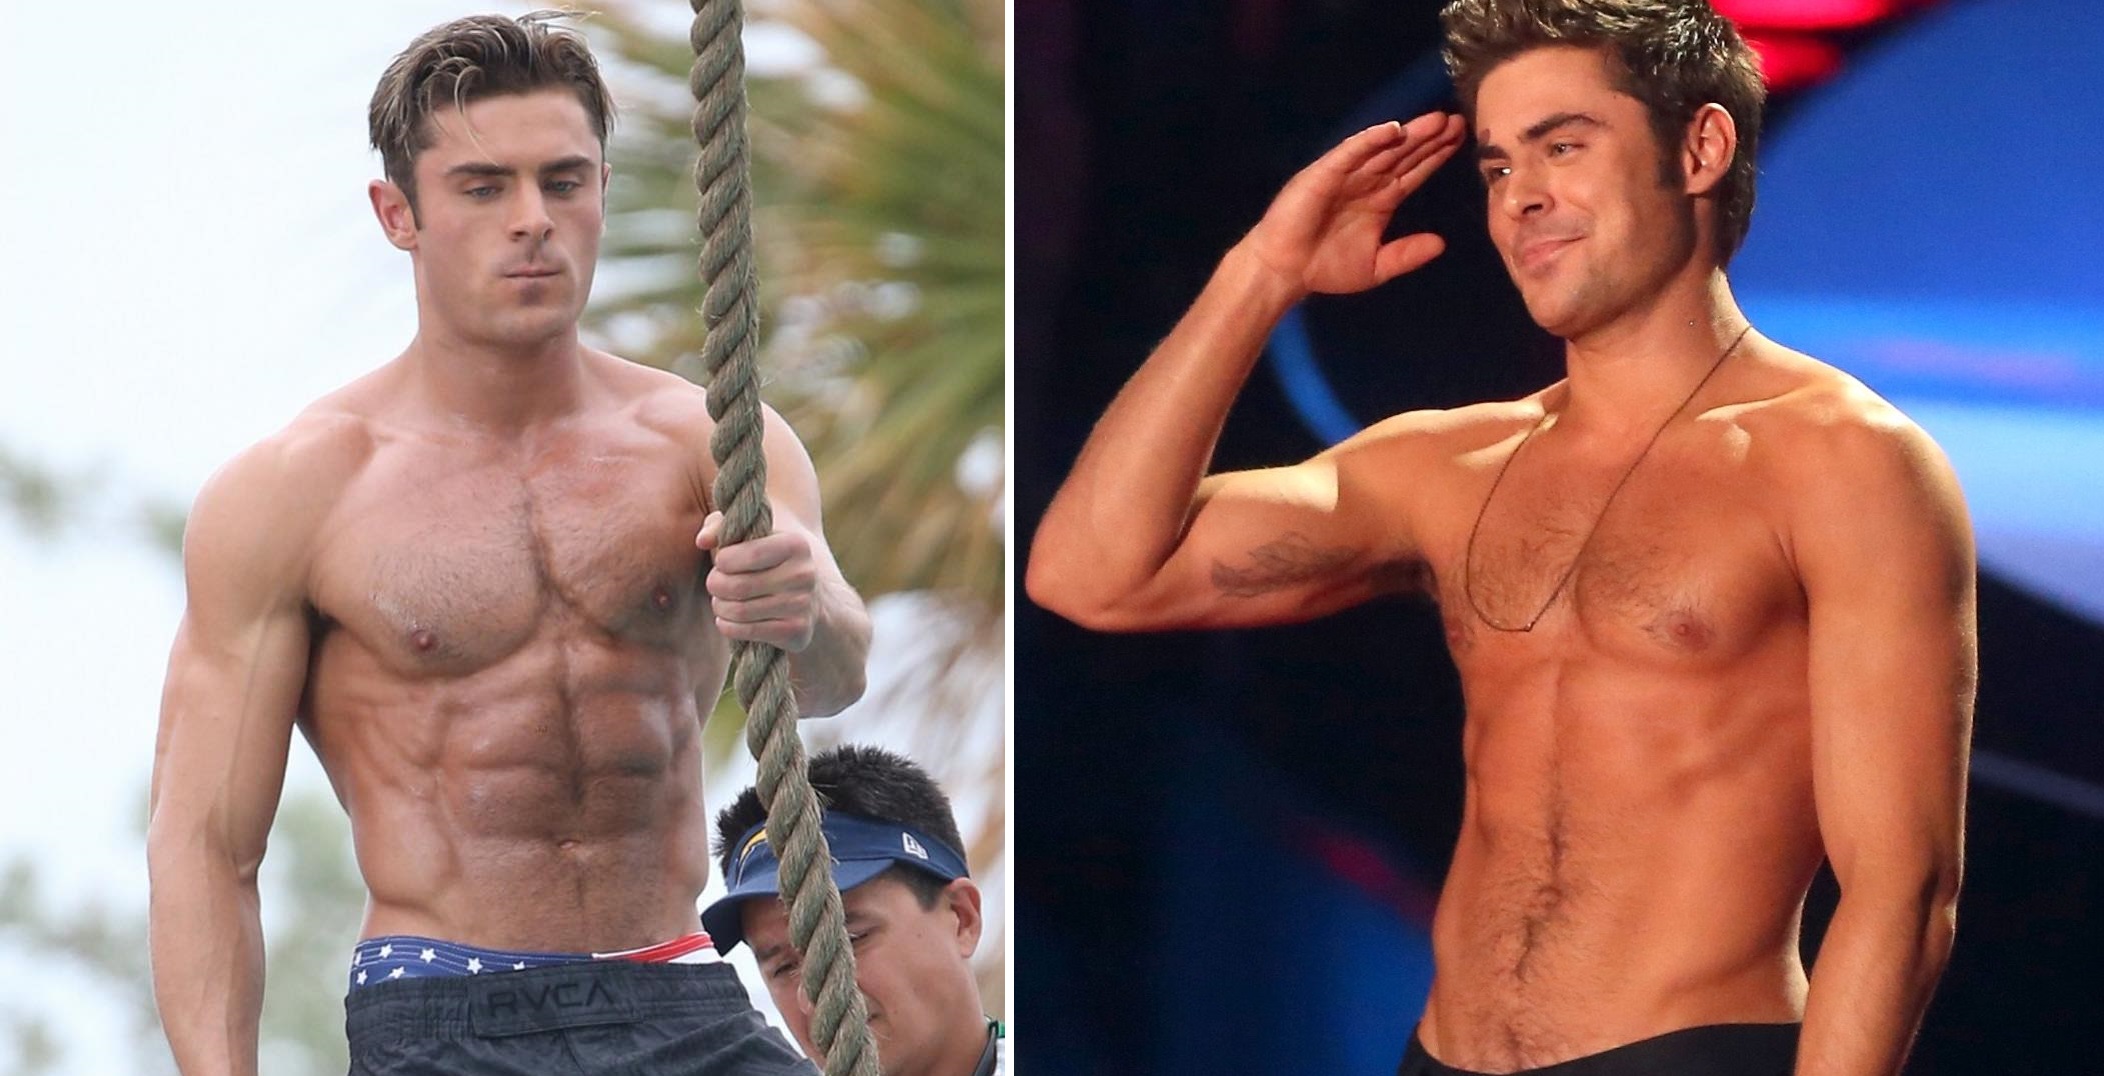 Here Are Some Hot Shirtless Pictures Of Zac Efron, Because Why Not?